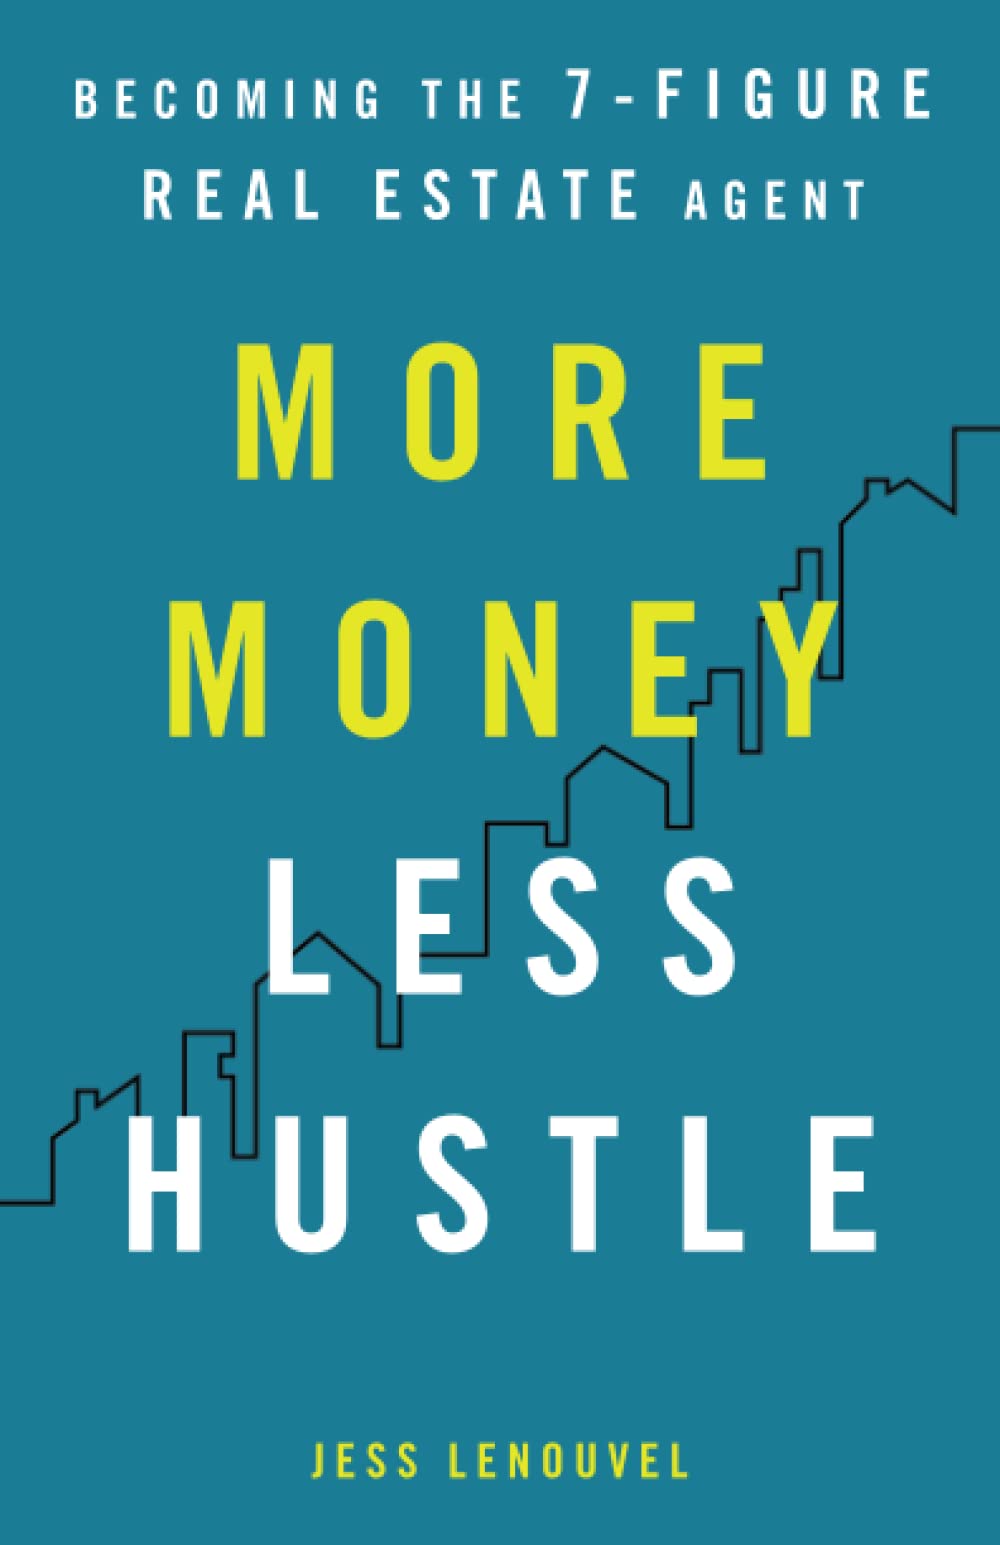 More Money, Less Hustle written by Jess Lenouvel book cover